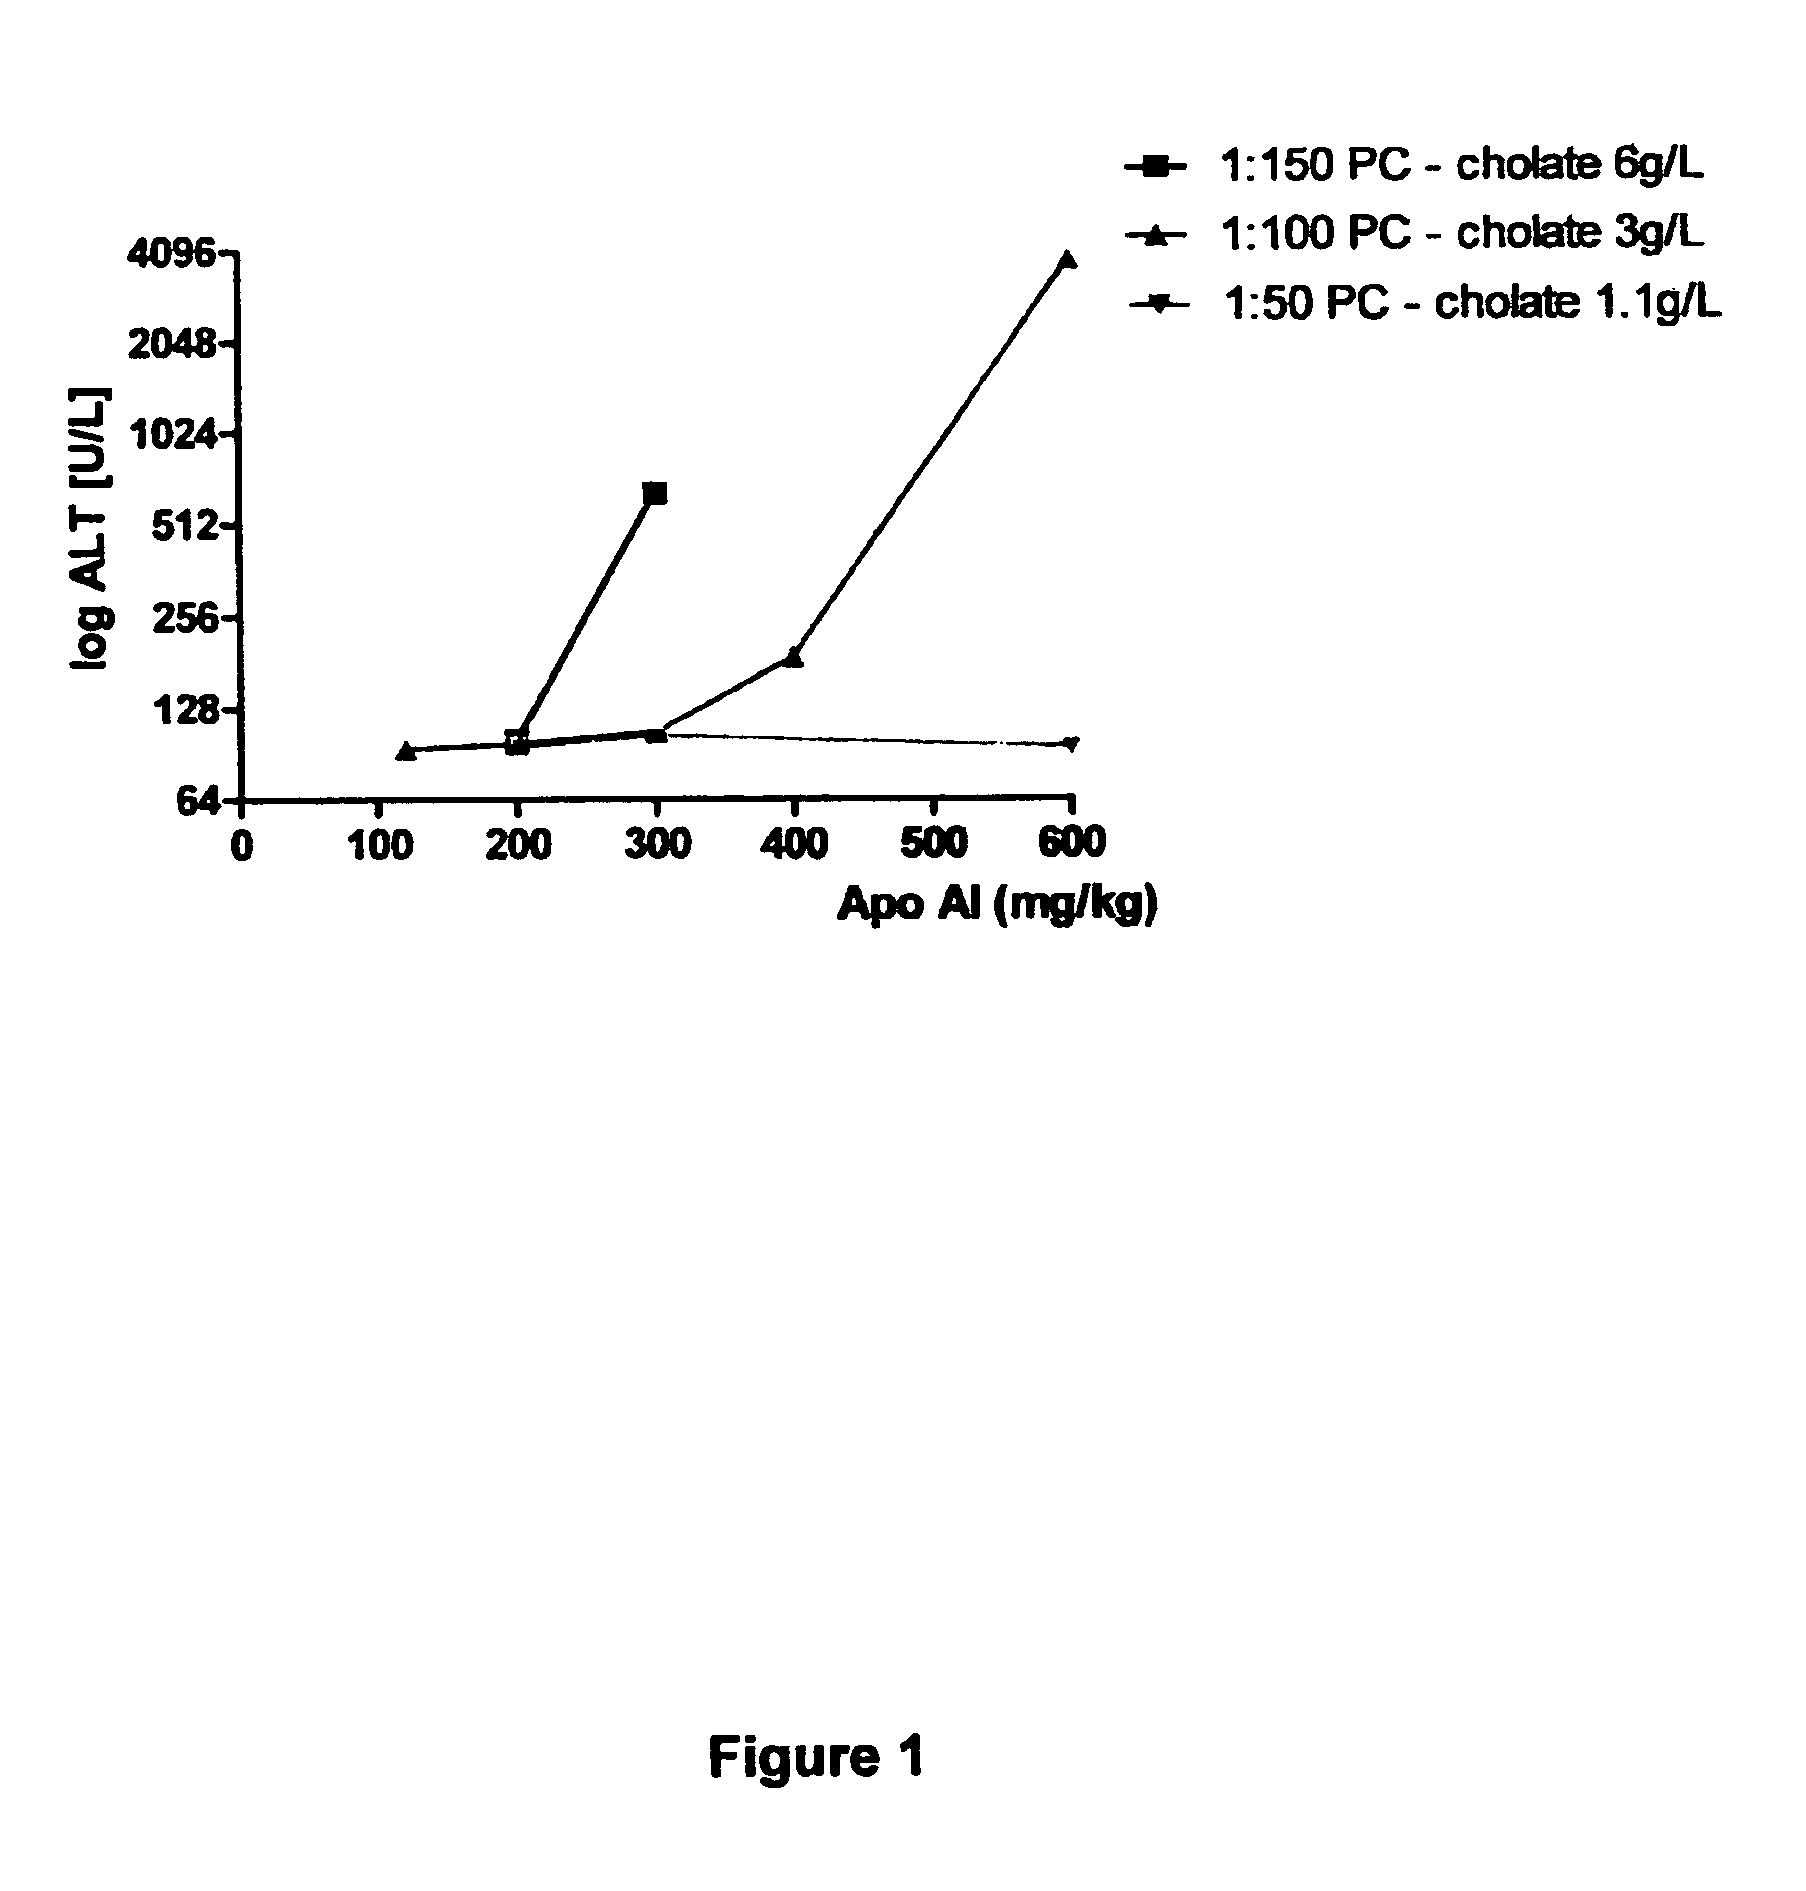 Reconstituted high density lipoprotein formulation and production method thereof